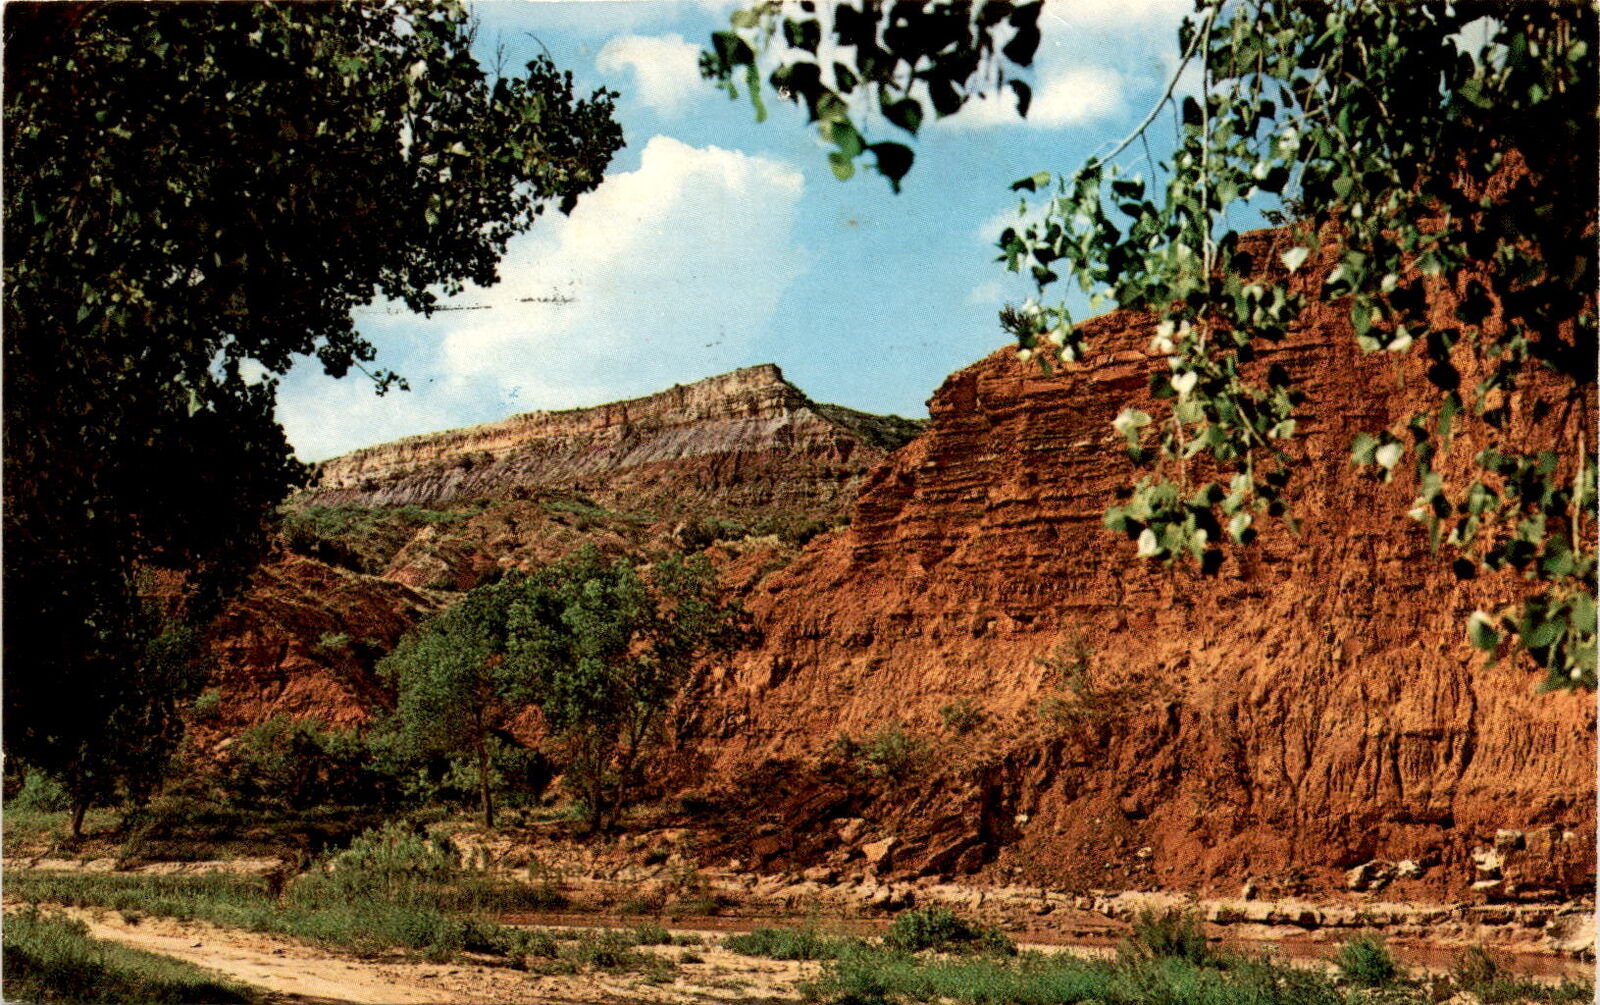 Palo Duro Canyon: Stunning rock layers & cultural influences